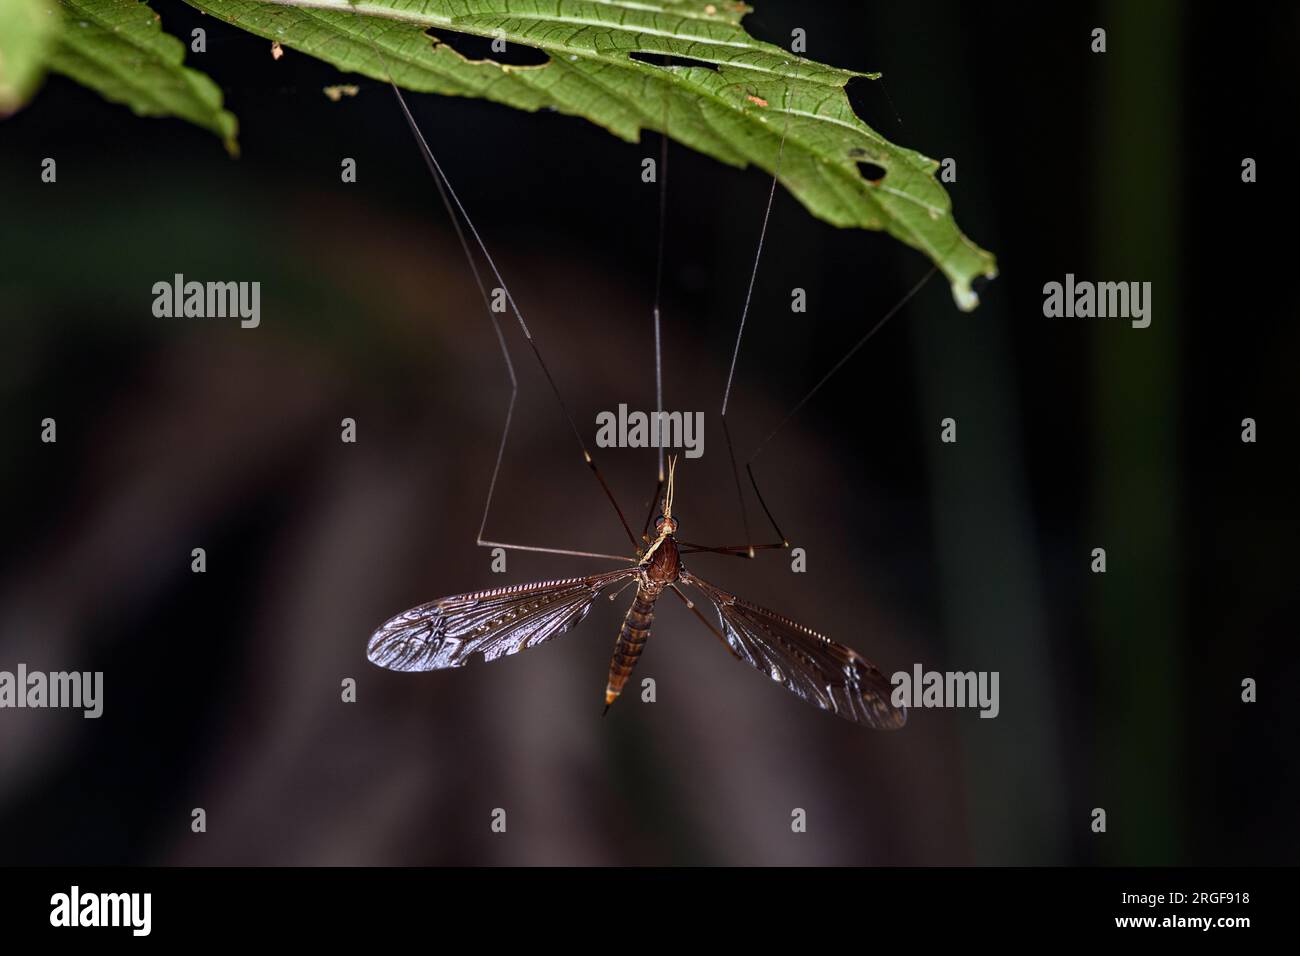 Cranefly (Family Tipulidae) from the cloudforest of Bosque de Paz, Costa Rica. Stock Photo